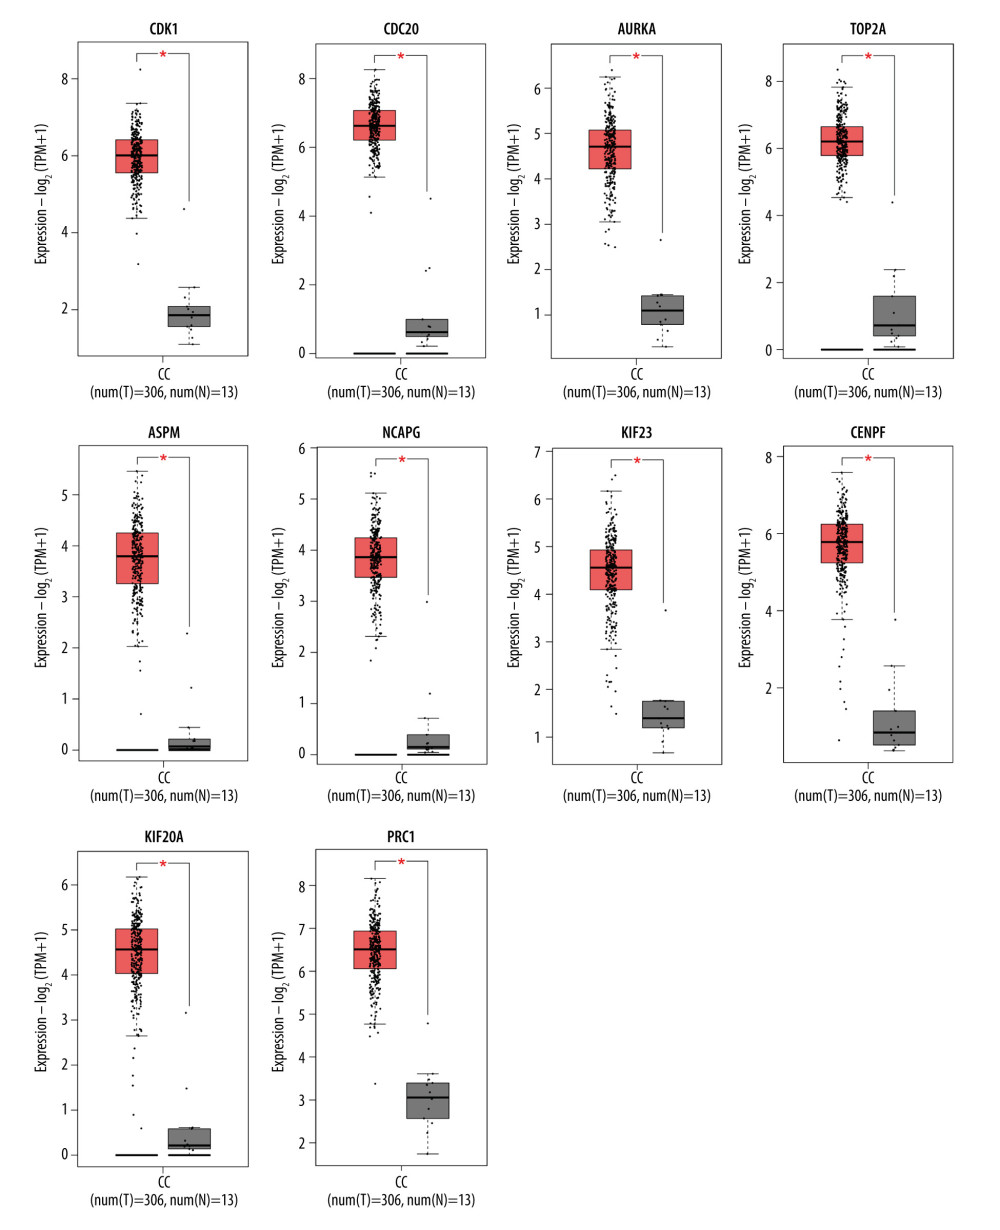 Boxplot graphs showing the expression levels of hub genes in normal cervical tissue and cervical cancer tissue via GEPIA website (http://gepia2.cancerpku.cn/). Red color represents tumor samples, while gray color represents normal samples. Red asterisks indicate P<0.05. CC – cervial cancer.